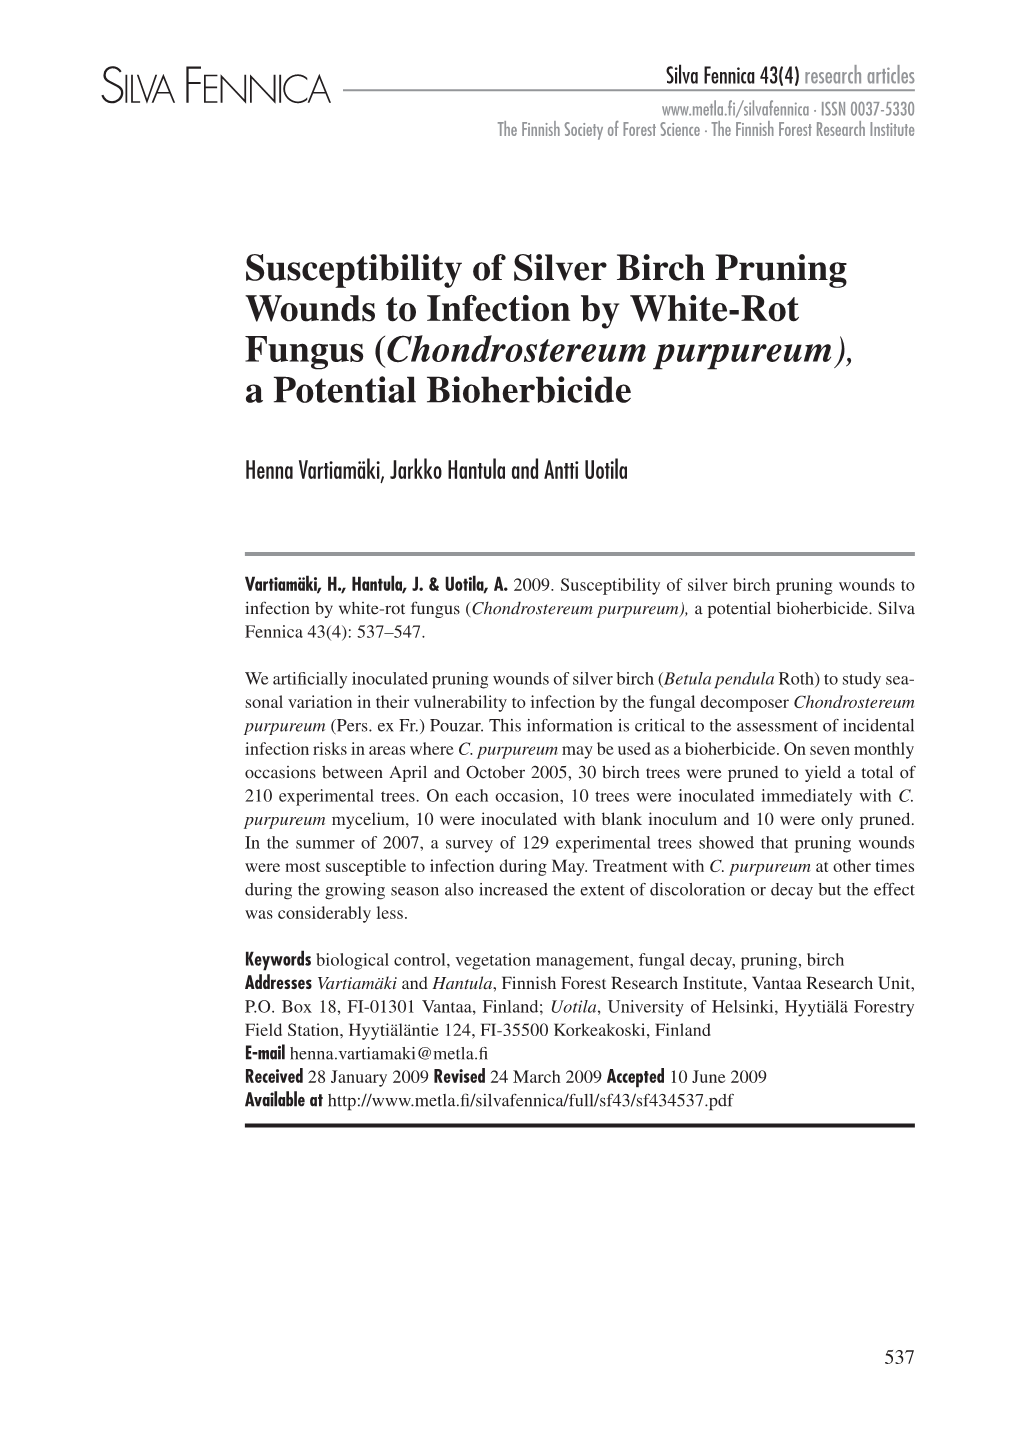 Susceptibility of Silver Birch Pruning Wounds to Infection by White-Rot Fungus (Chondrostereum Purpureum), a Potential Bioherbicide